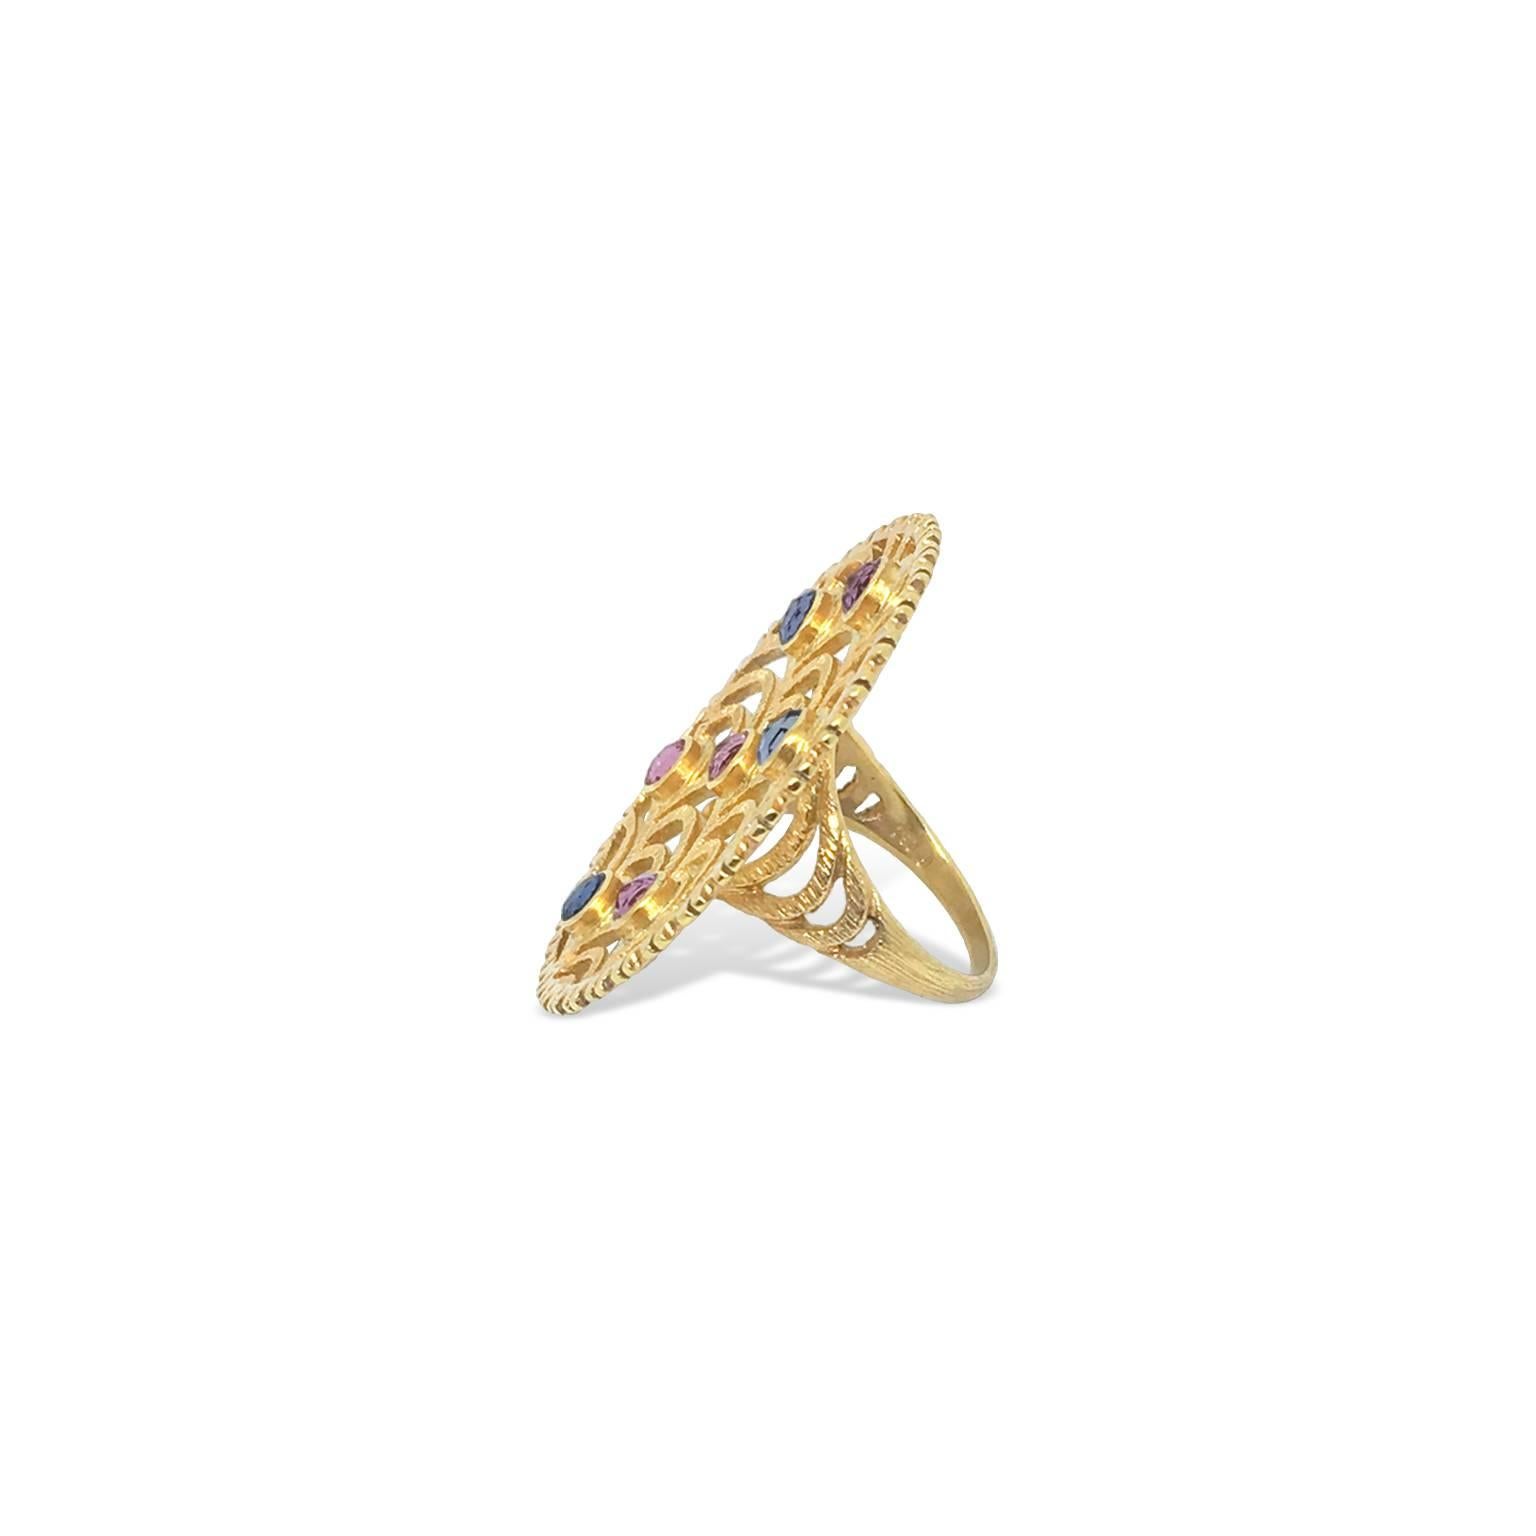 LALAoUNIS Nubia Ring in 18k Yellow Gold with Light Pink and Blue Sapphires In New Condition For Sale In New York, NY